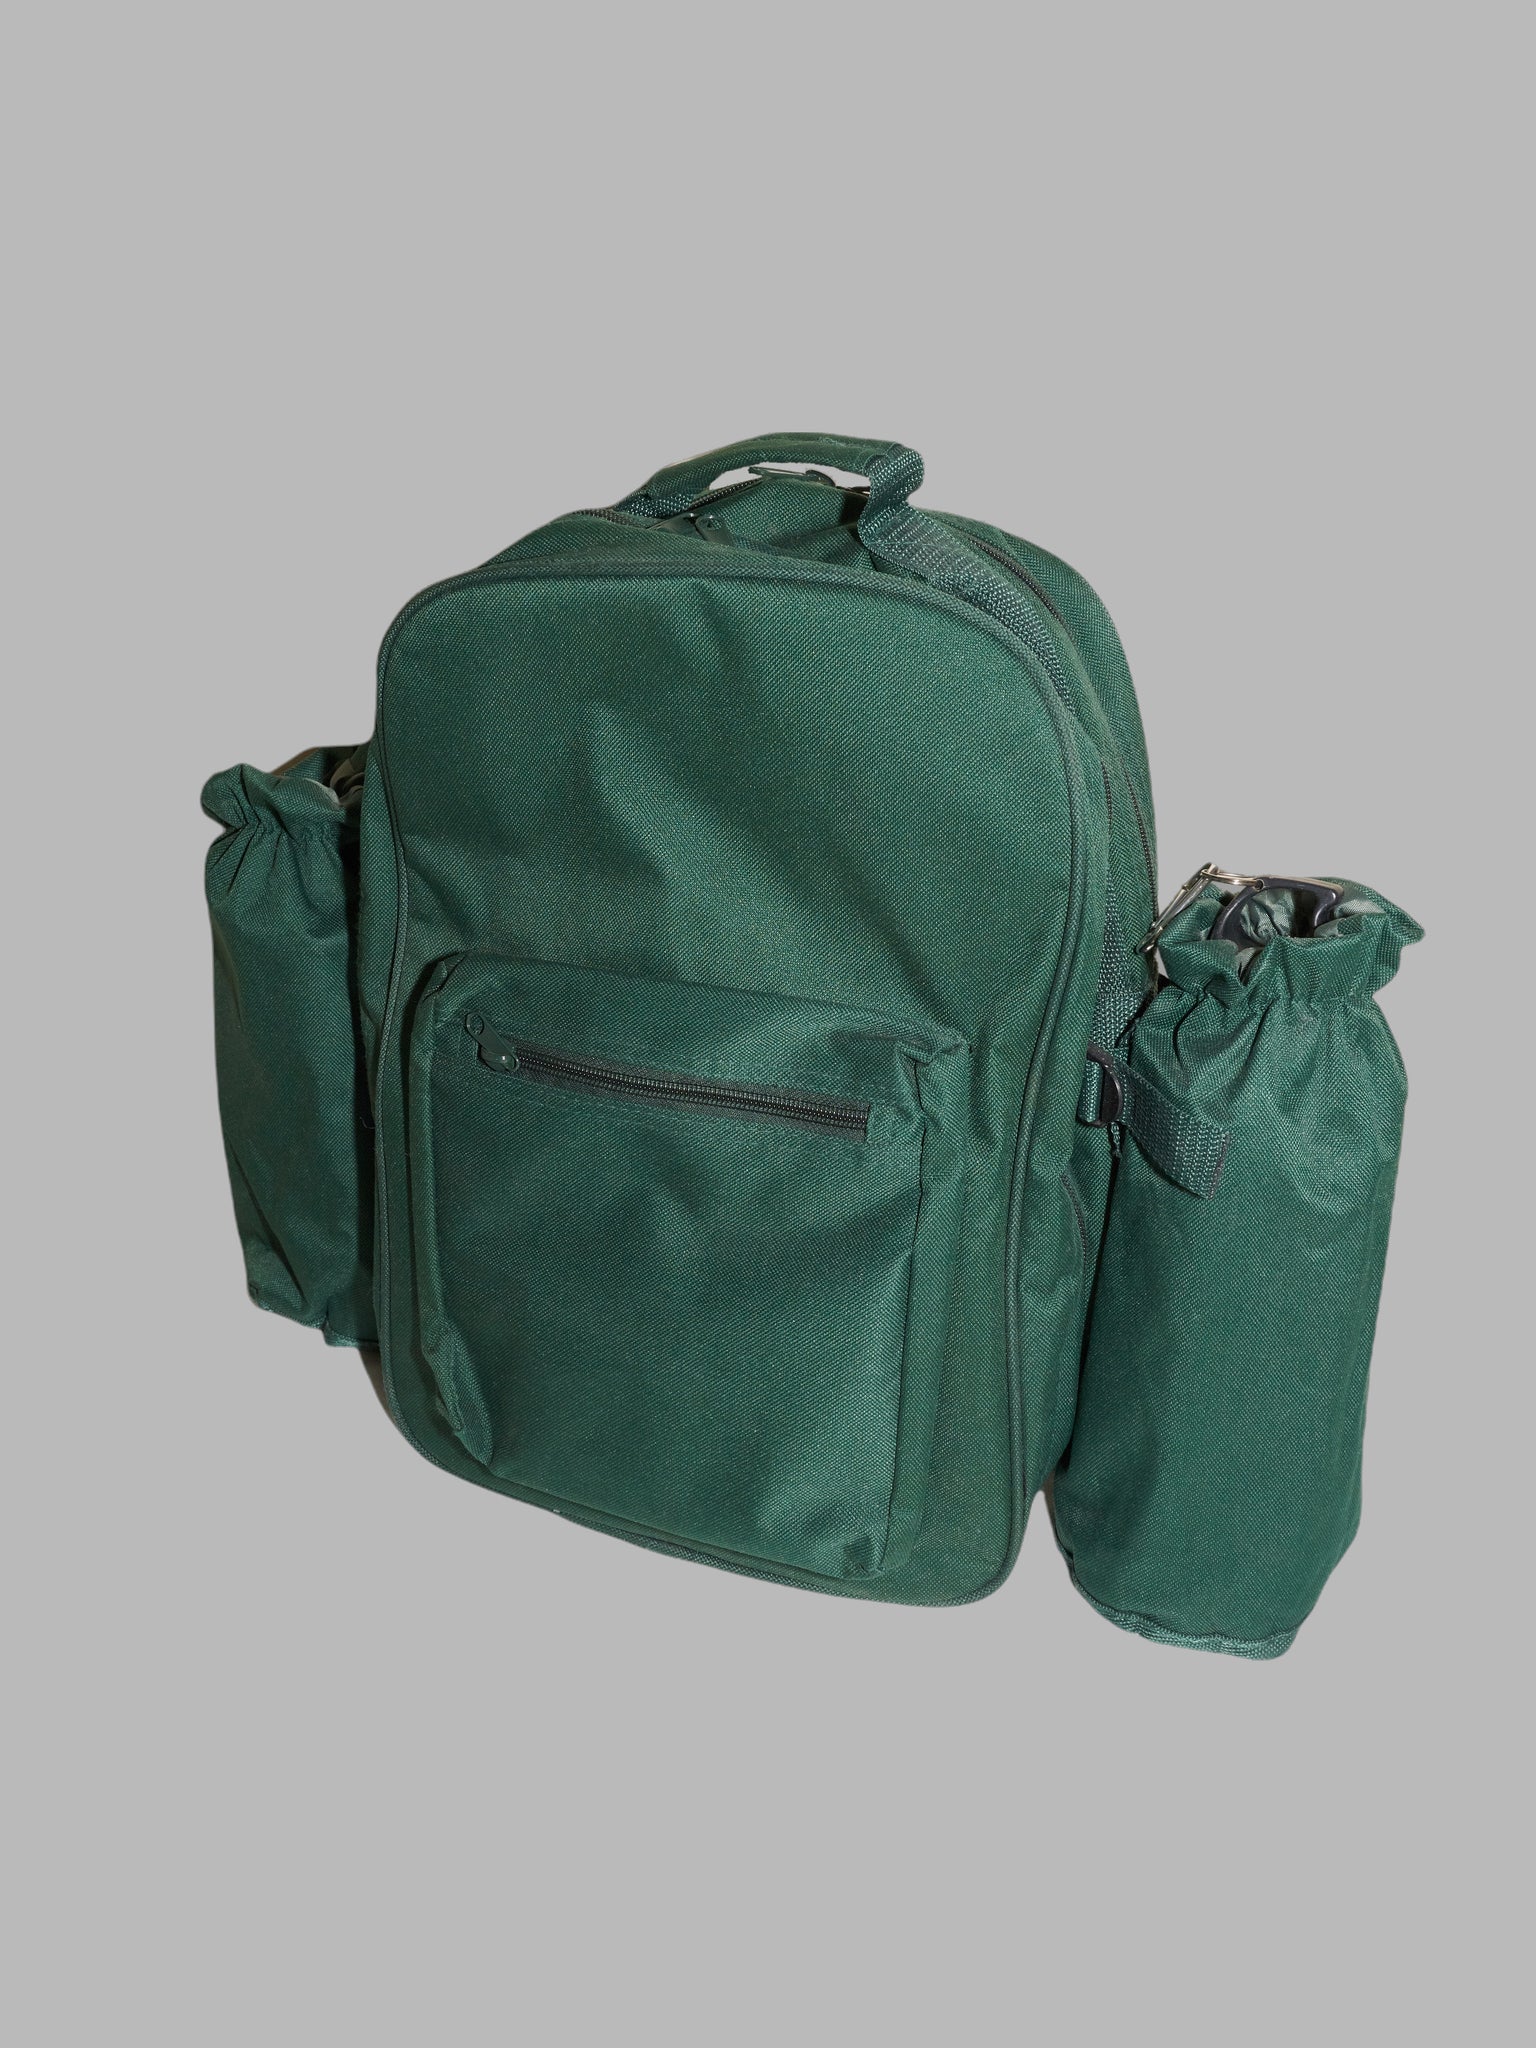 Green canvas “Lt Legal innovation and tech fest” backpack with full picnic set